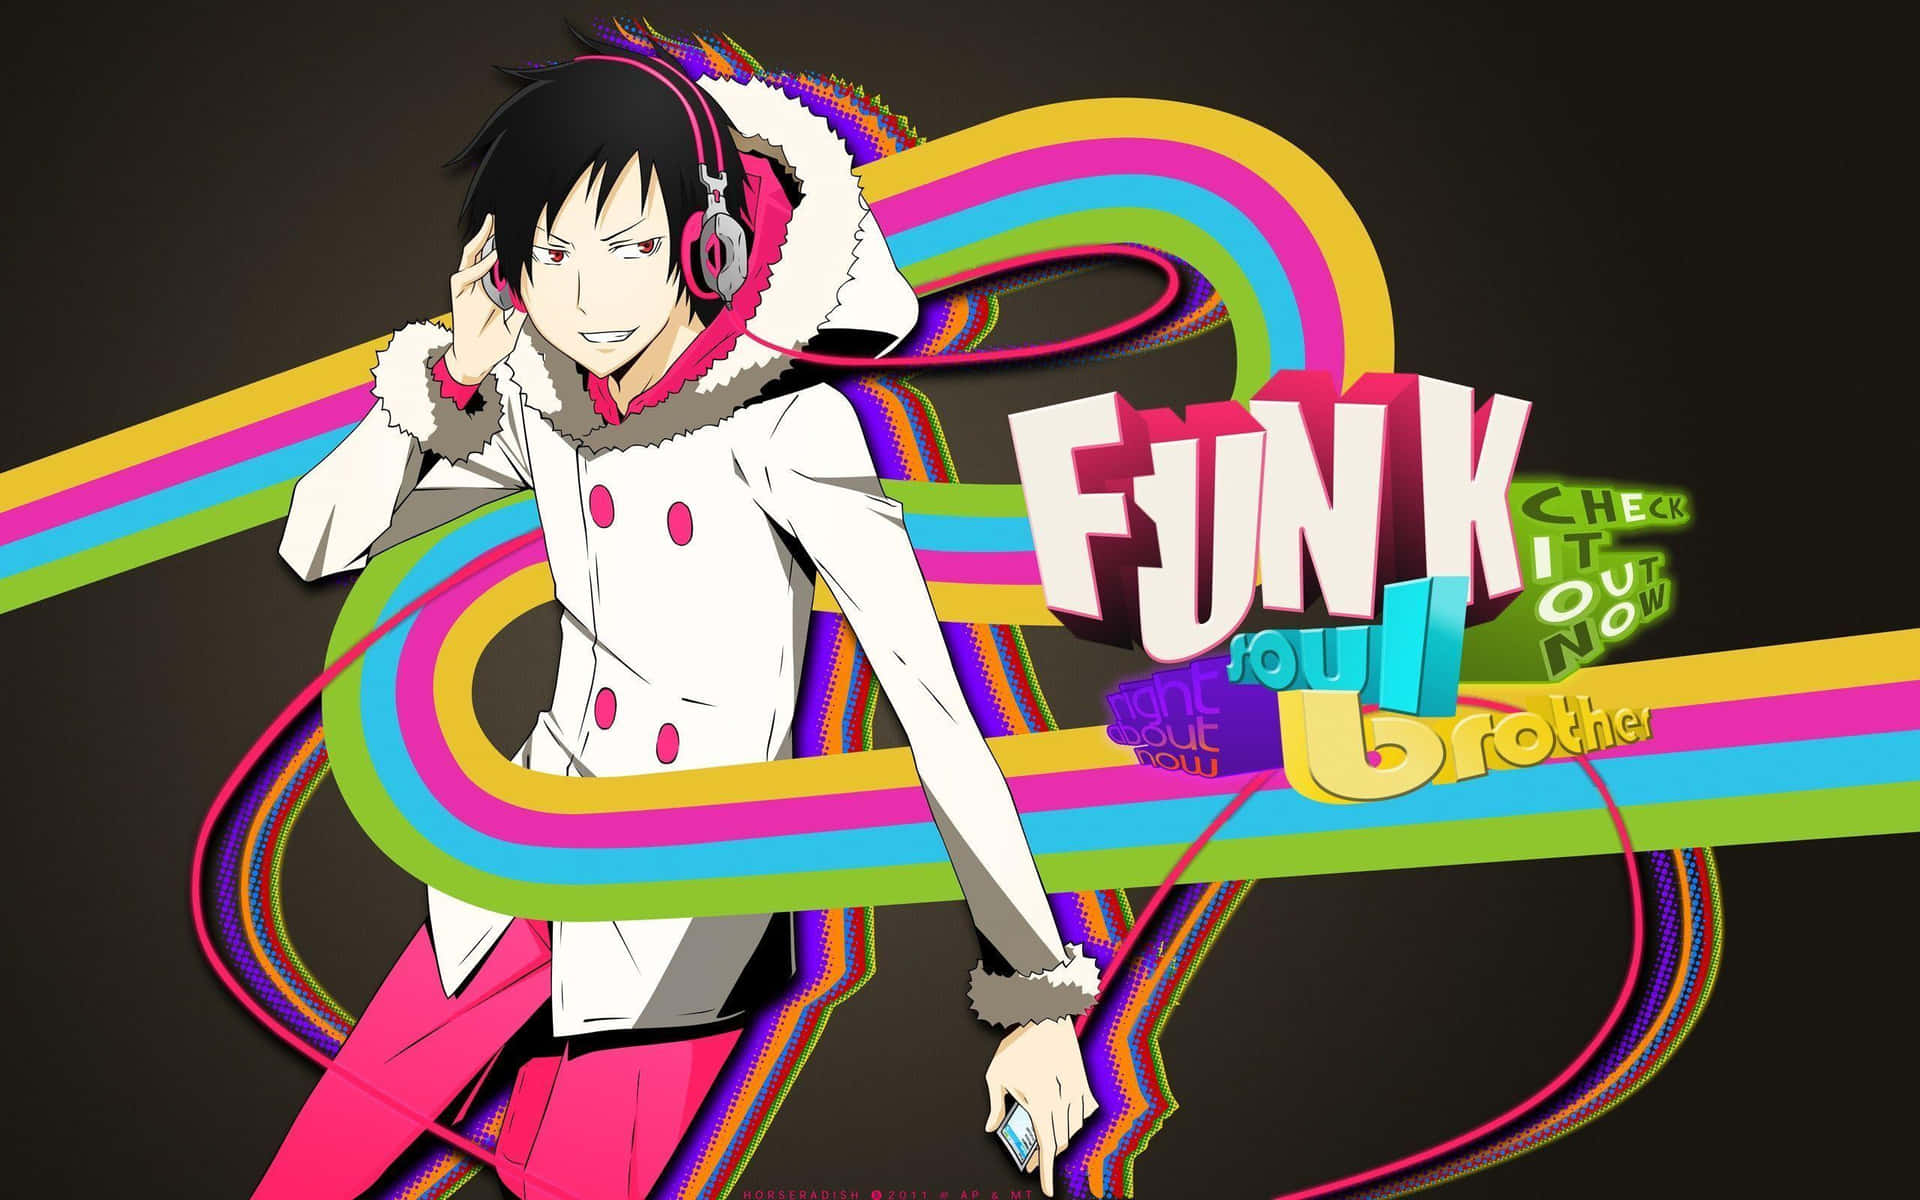 "Funk it up and get grooving!" Wallpaper